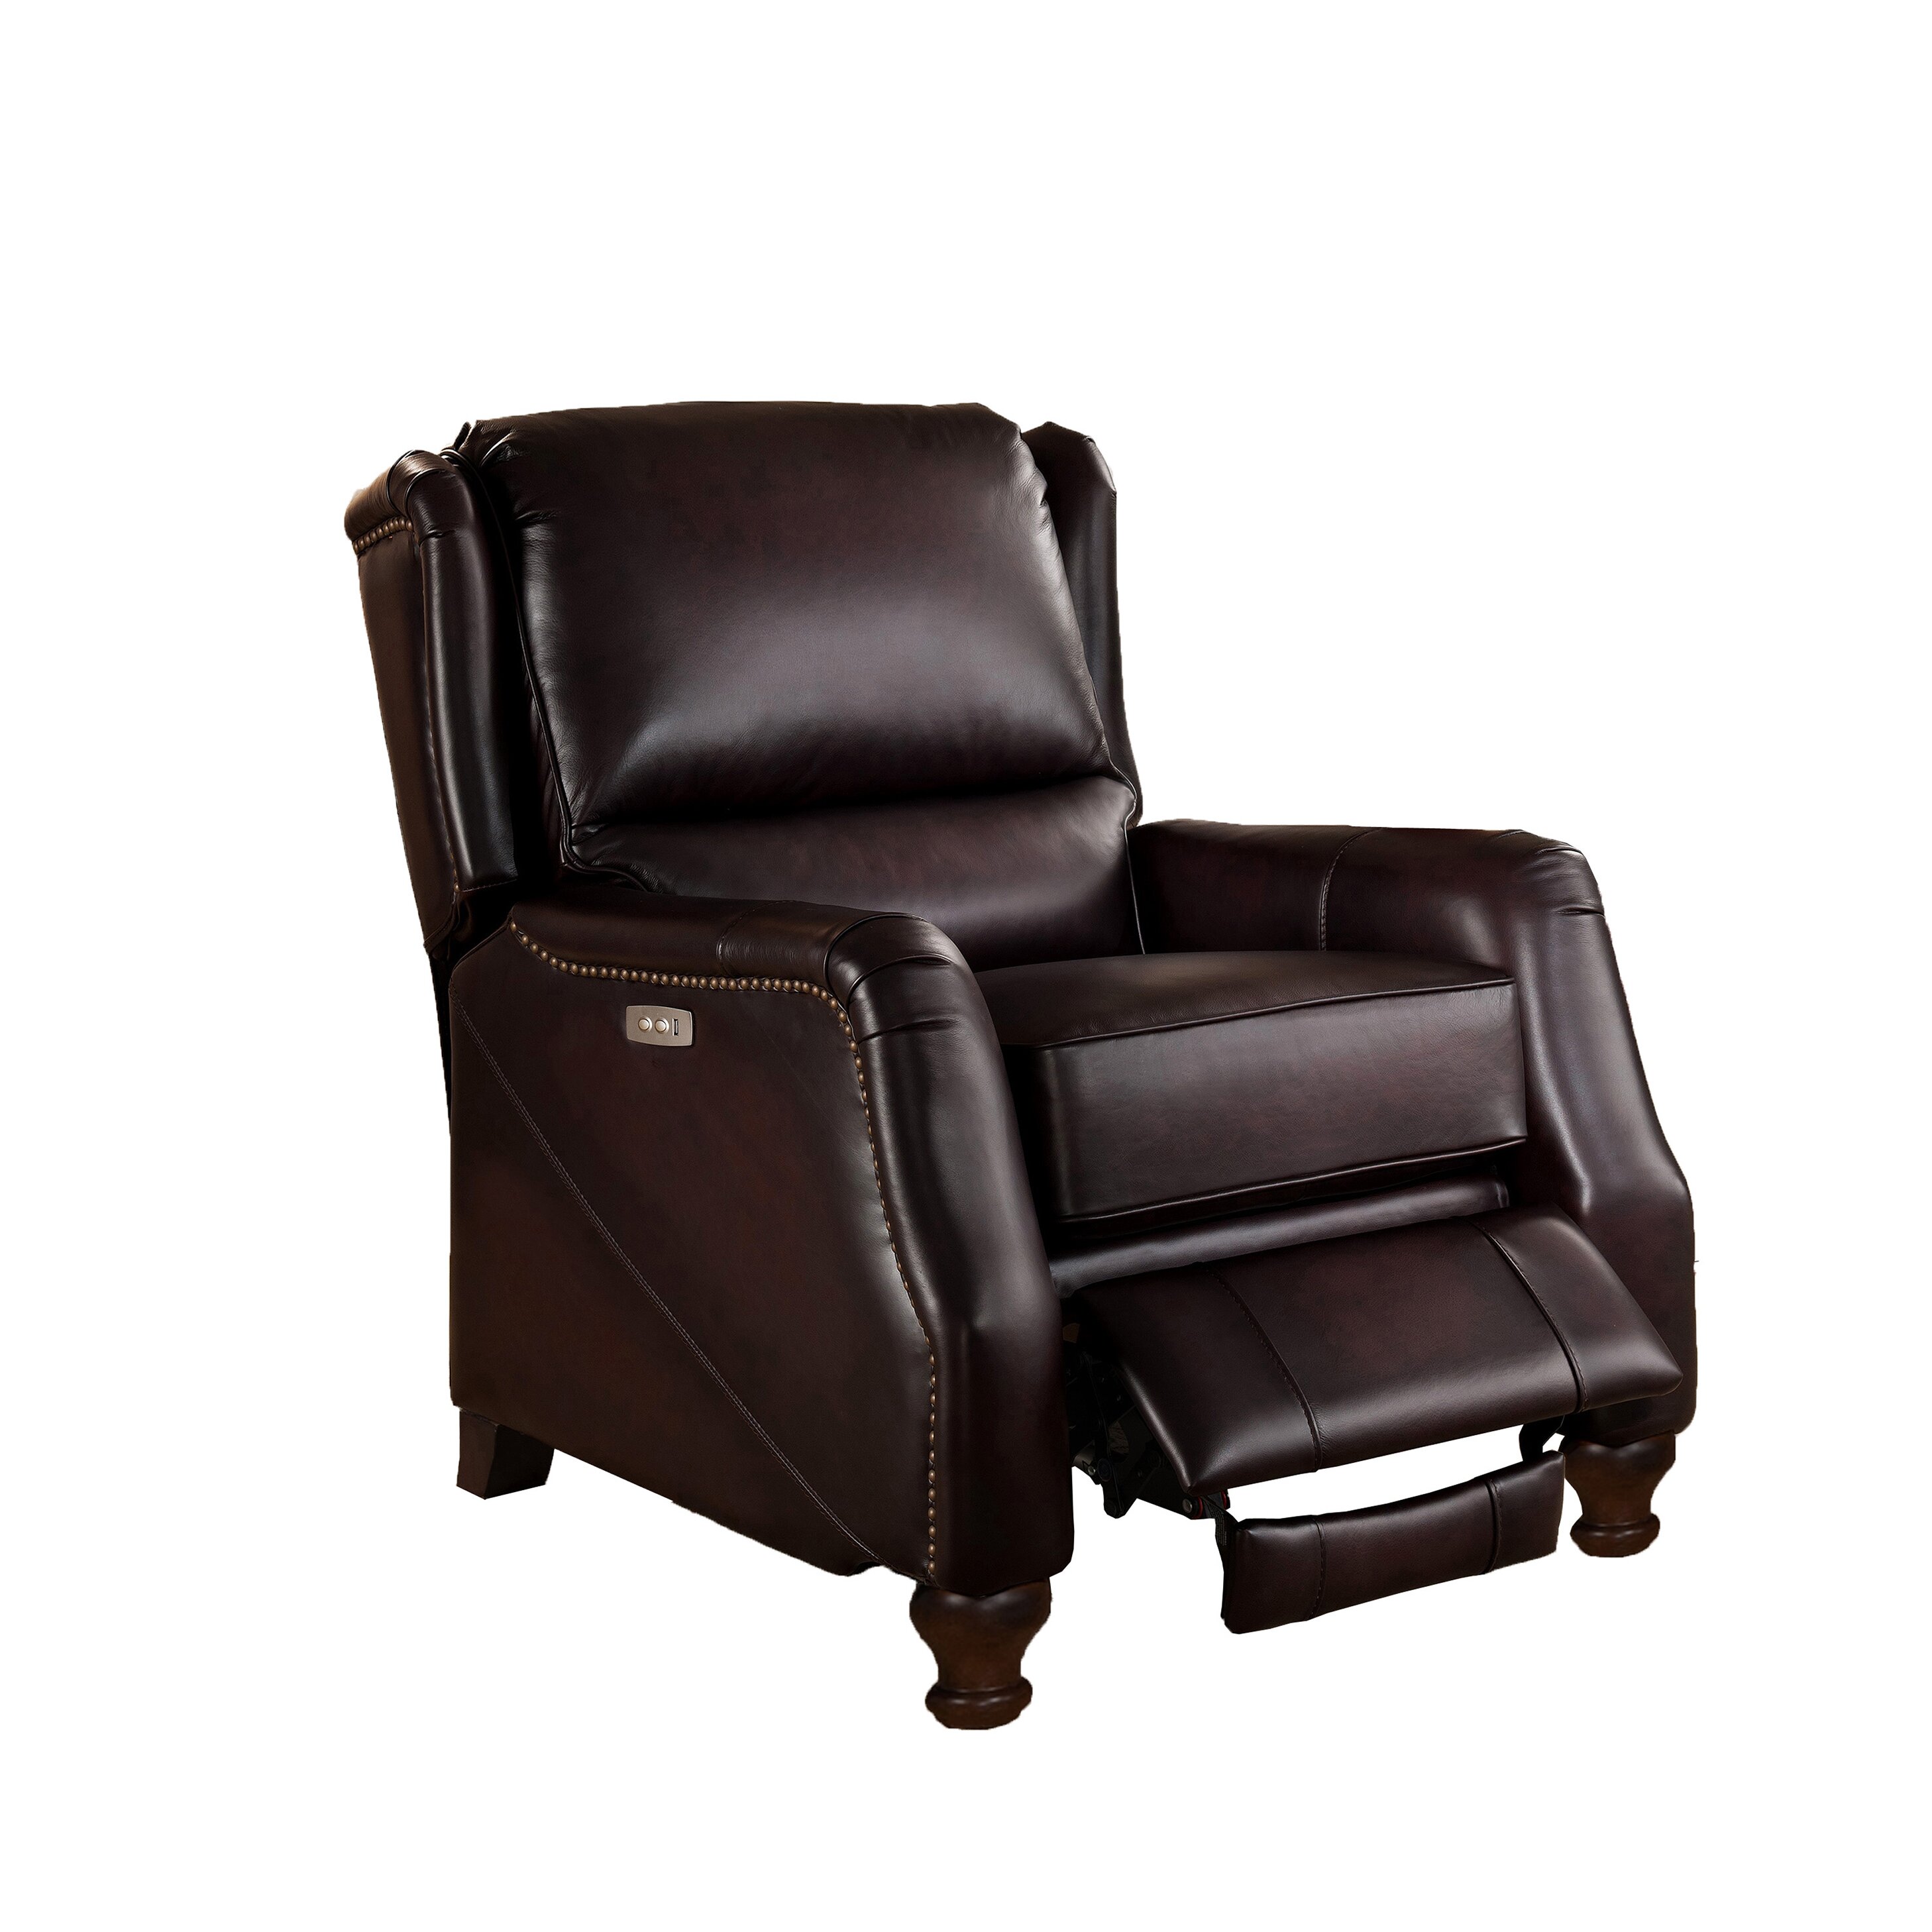 Amax Imperial Leather Power Recliner with USB Port | Wayfair - Amax Imperial Leather Power Recliner with USB Port